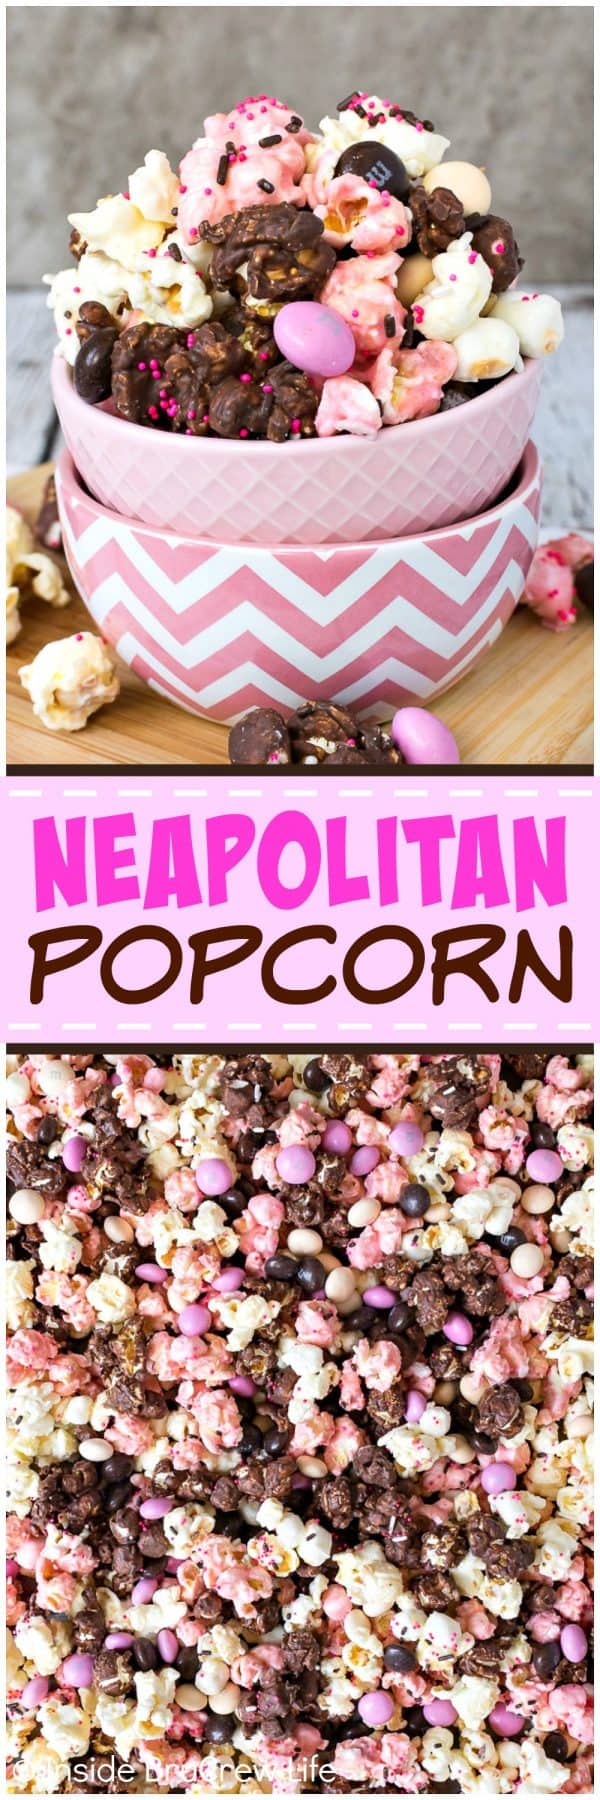 Neapolitan Popcorn - this easy no bake snack mix is coated in chocolate, vanilla, and strawberry chocolate and loaded with chocolate candies. Easy no bake snack mix recipe to make for movie nights or parties. #popcorn #chocolate #strawberry #nobake #snackmix #neapolitan 